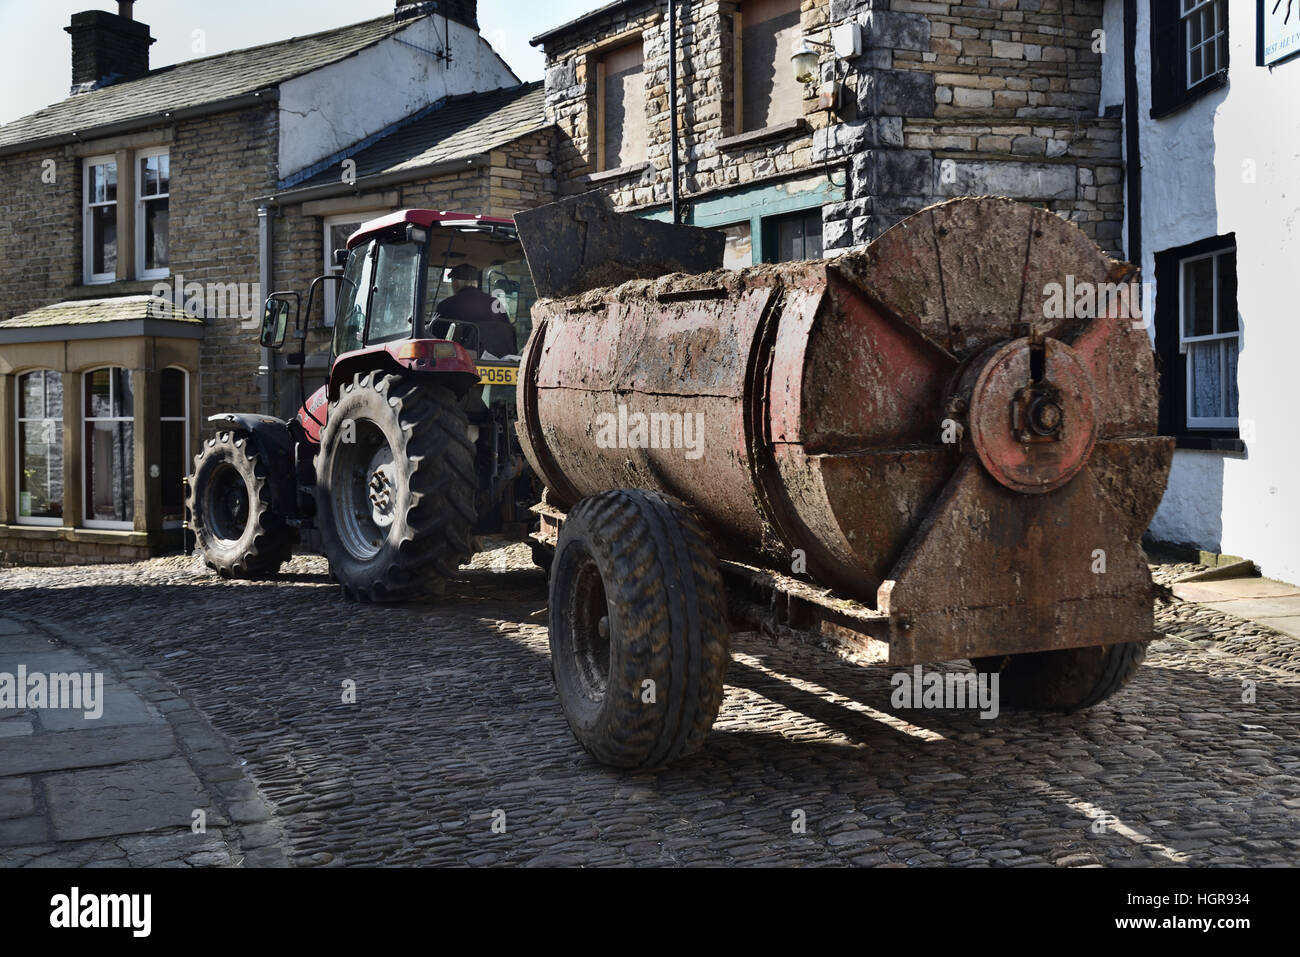 Tractor towing muck spreader, Main Street, Dent, Yorkshire Dales National Park, Cumbria, England, UK. Stock Photo